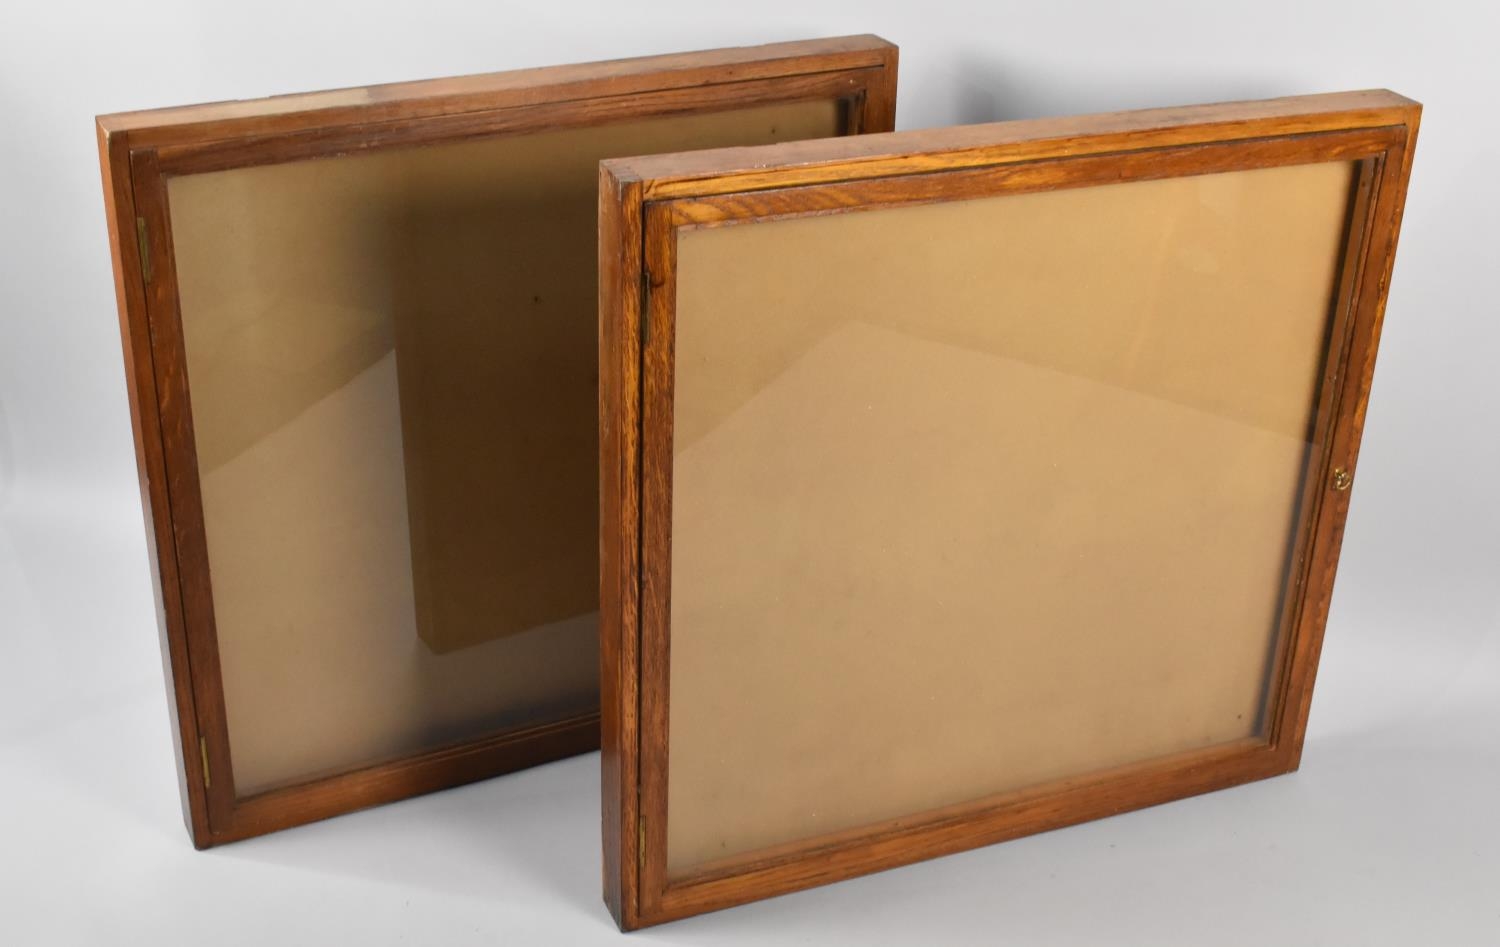 Two Display Cases, Reputed to be British Railway Cases from The Birmingham BR Boardroom, 84x82cms - Image 2 of 2